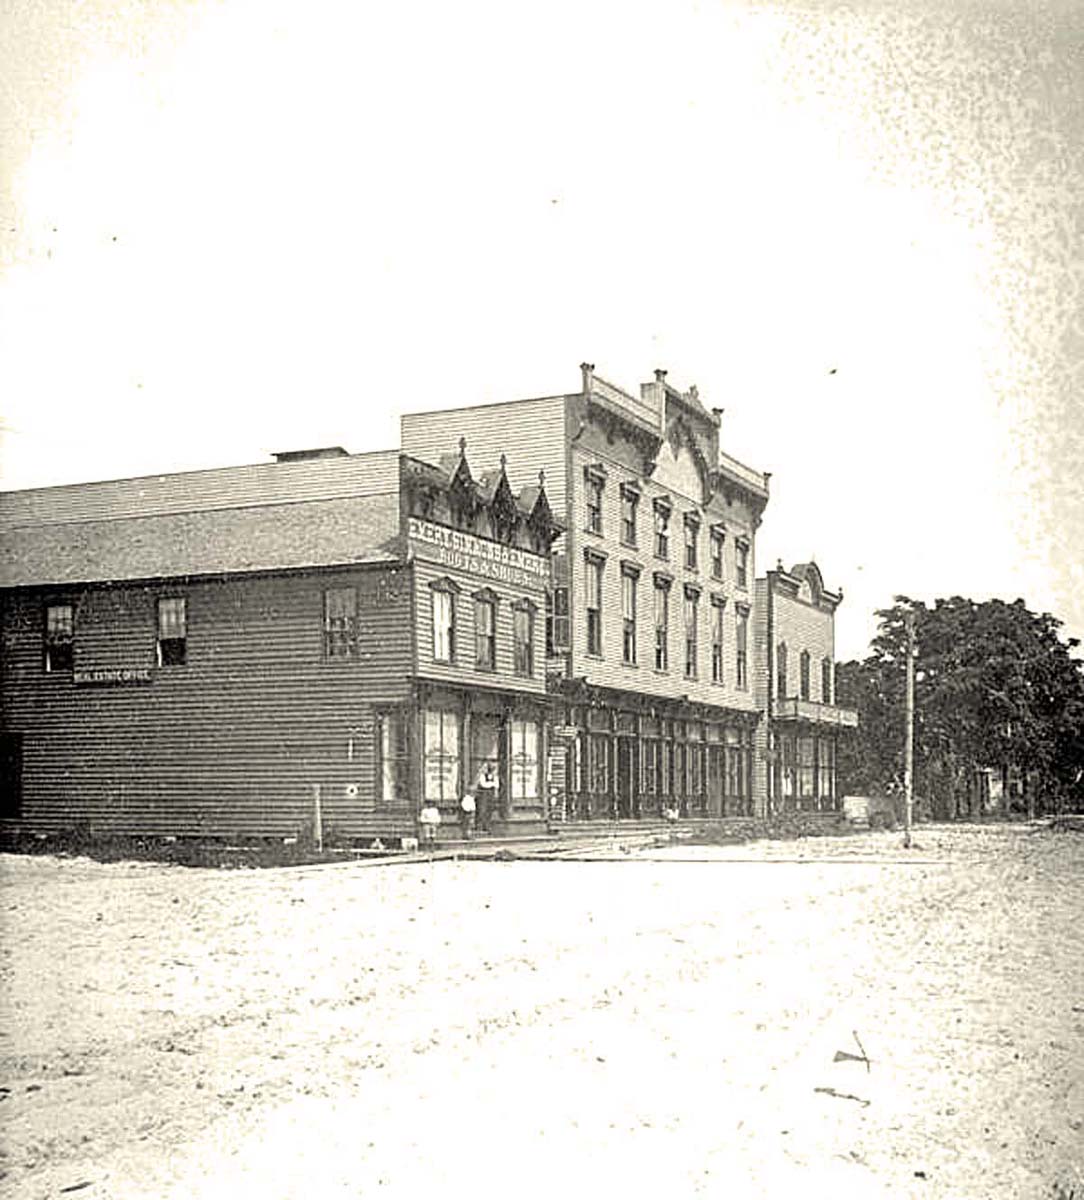 Tampa. View of the opera house, circa 1870